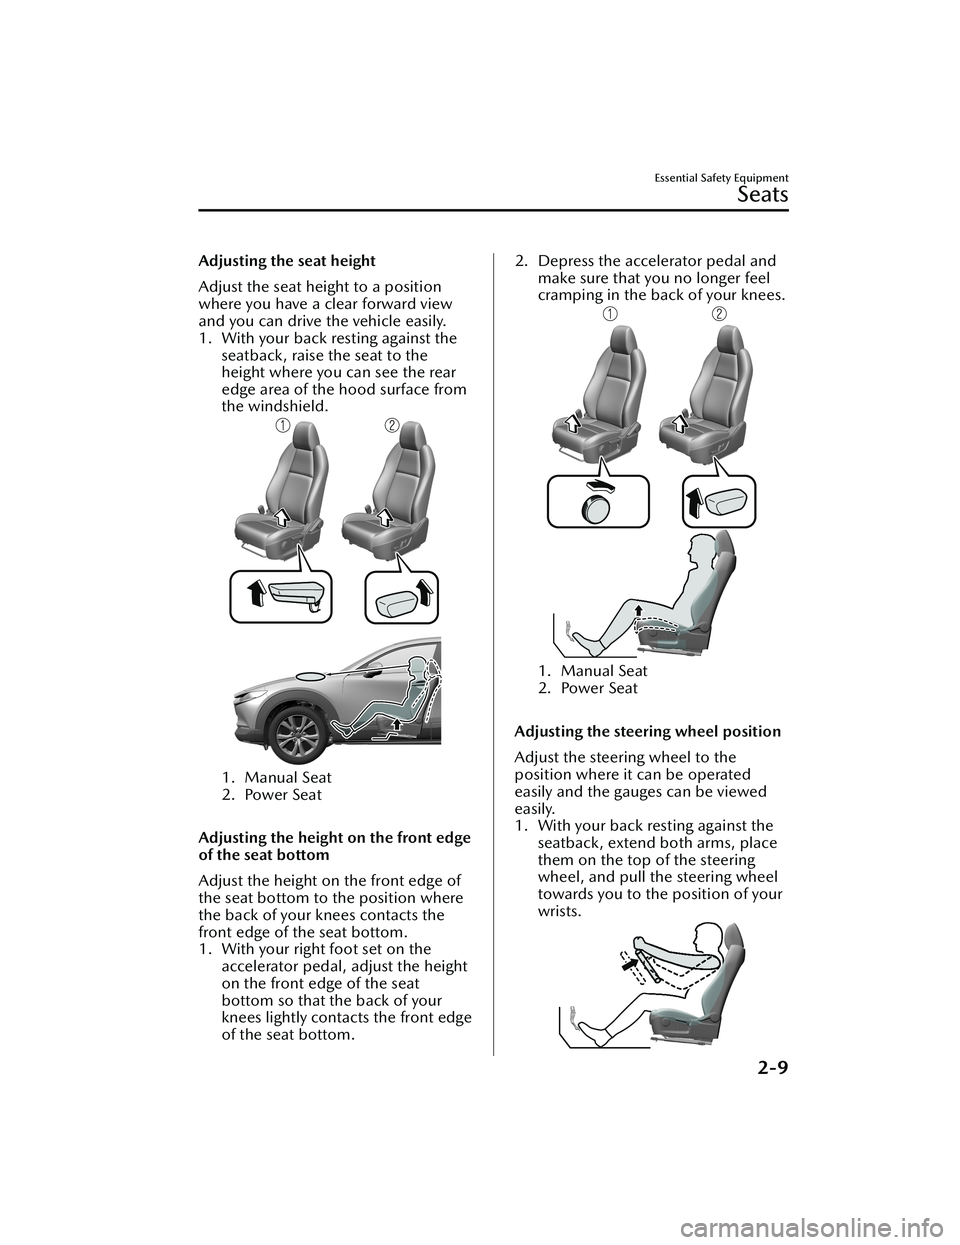 MAZDA MODEL CX-30 2021 Owners Manual Adjusting the seat height
Adjust the seat height to a position
where you have a clear forward view
and you can drive the vehicle easily.
1. With your back resting against theseatback, raise the seat t